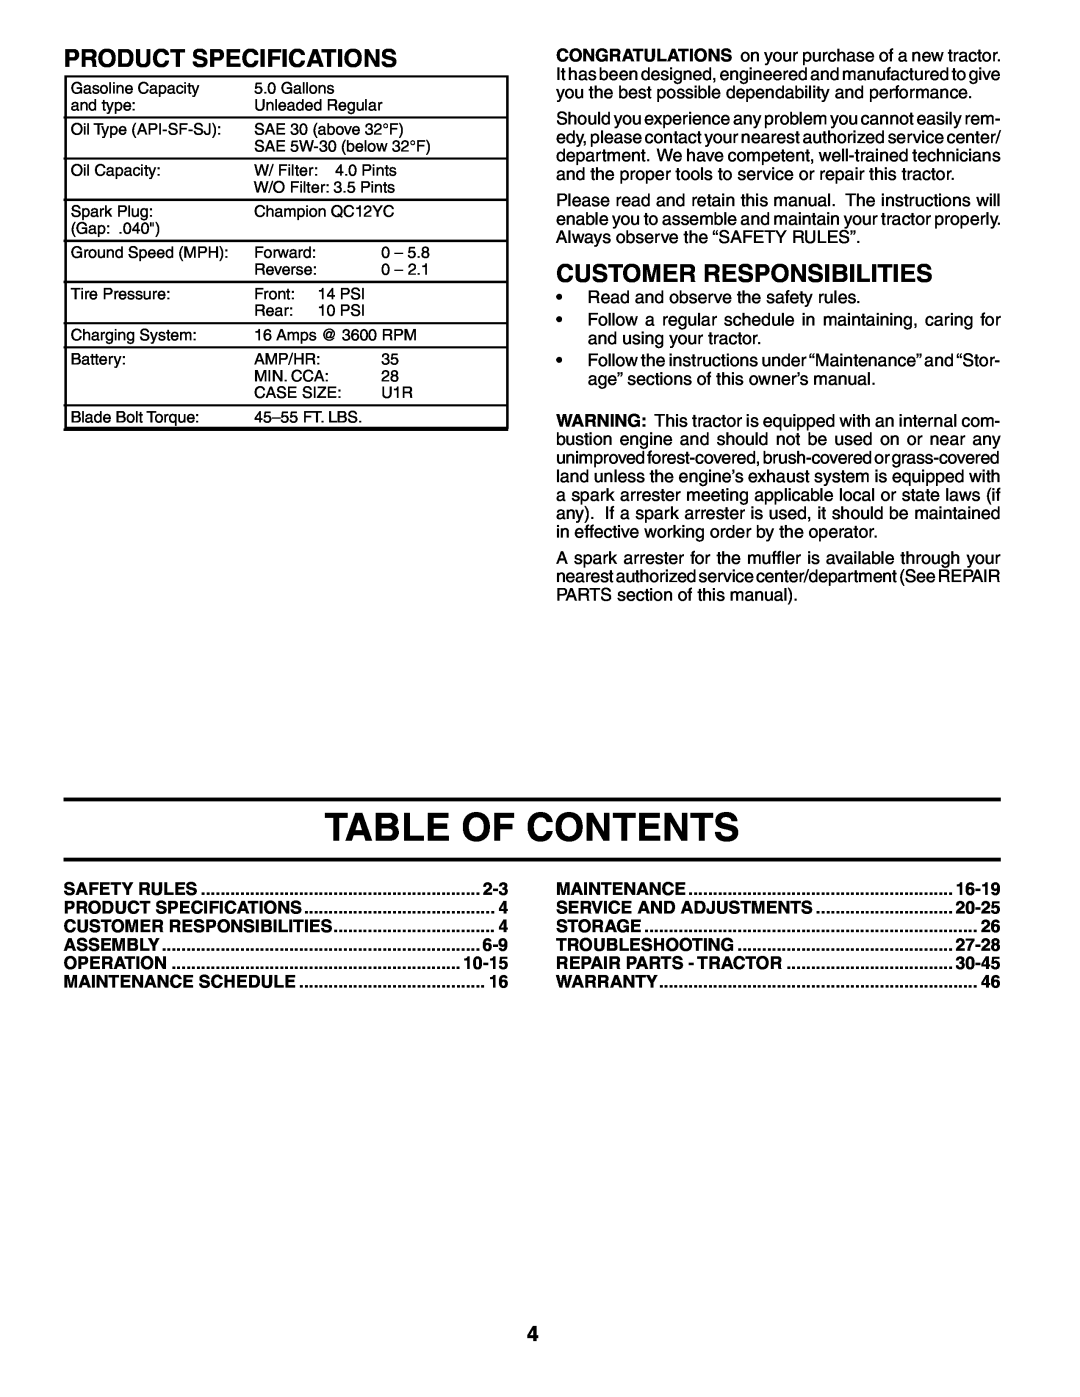 Poulan 954569455, 184425 manual Table Of Contents, Product Specifications, Customer Responsibilities 